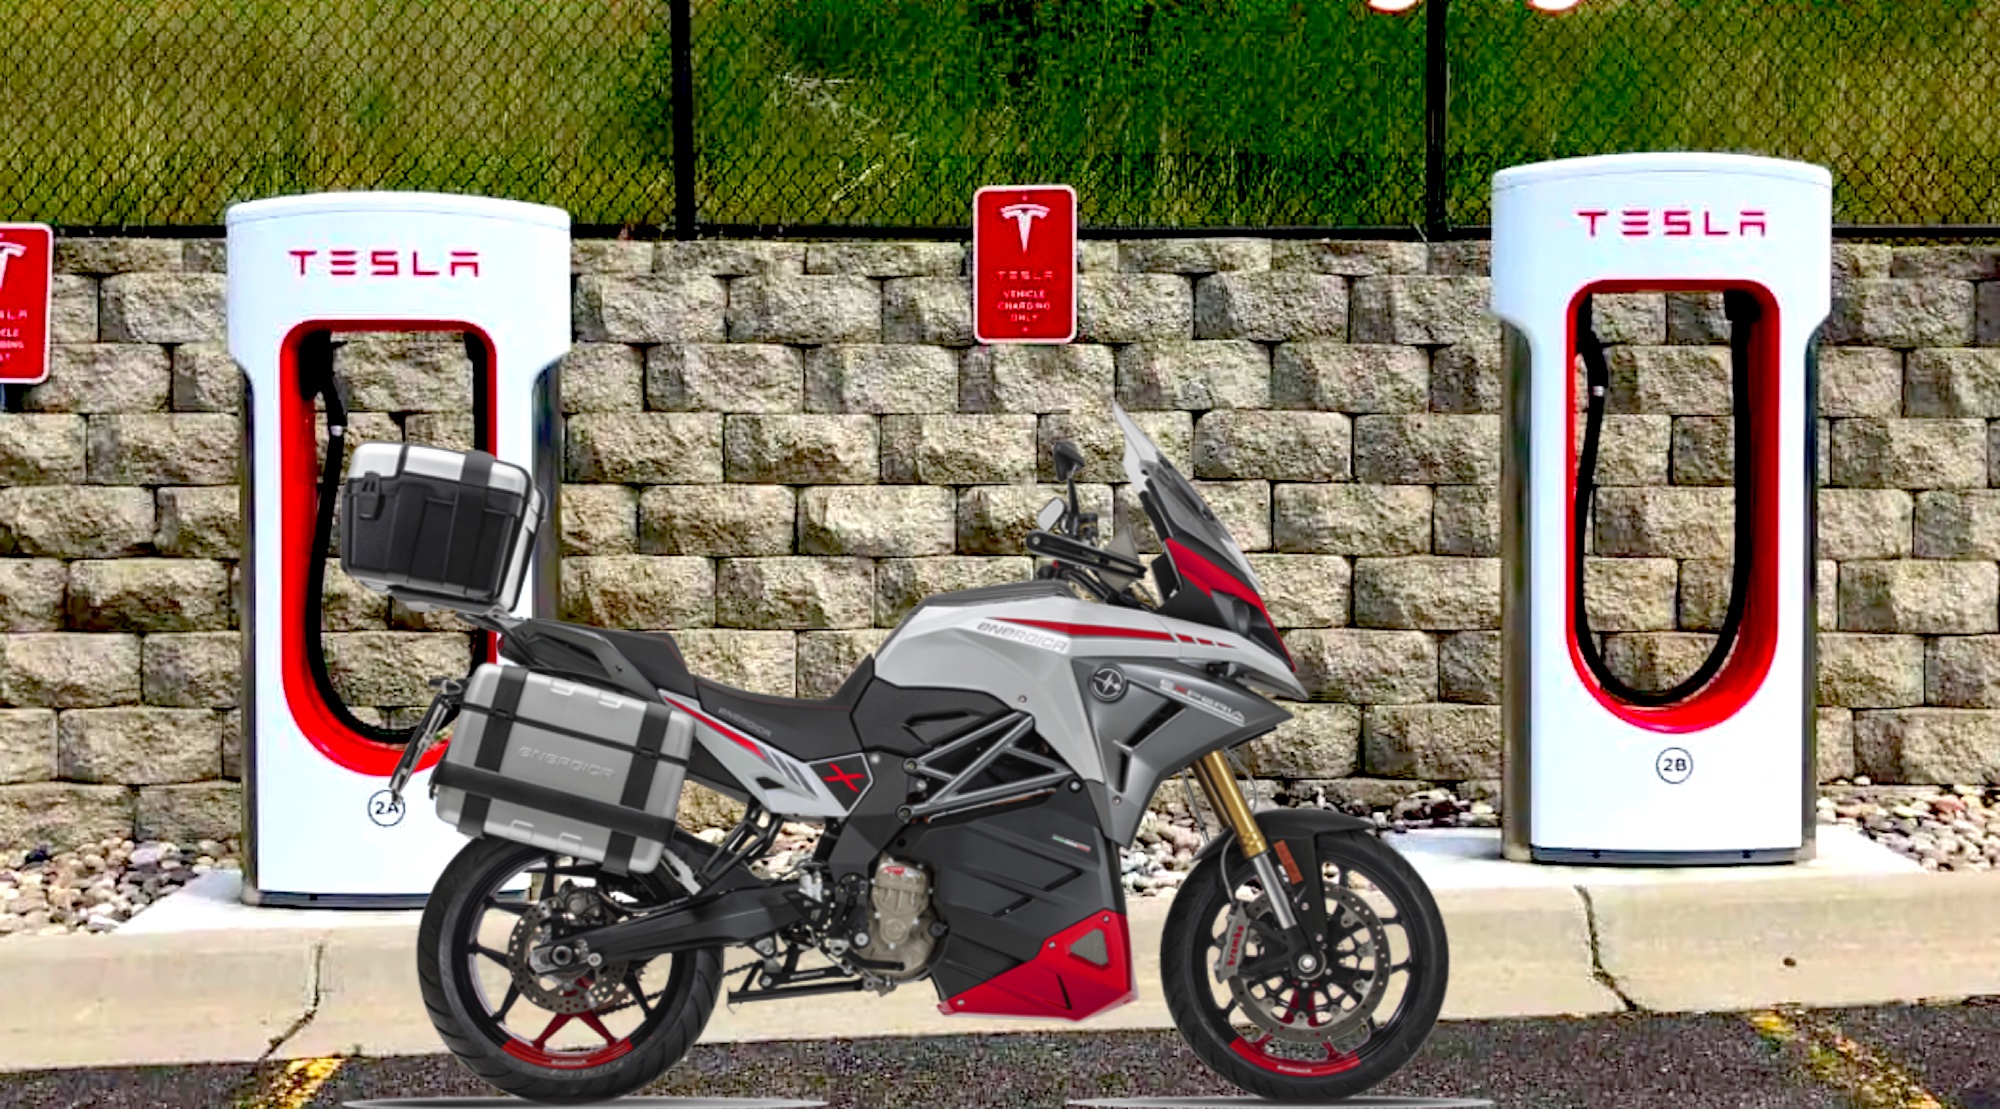 An Energica Experia next to a pair of Tesla charging stations. Media sourced from Energica and Vehicle Pro.